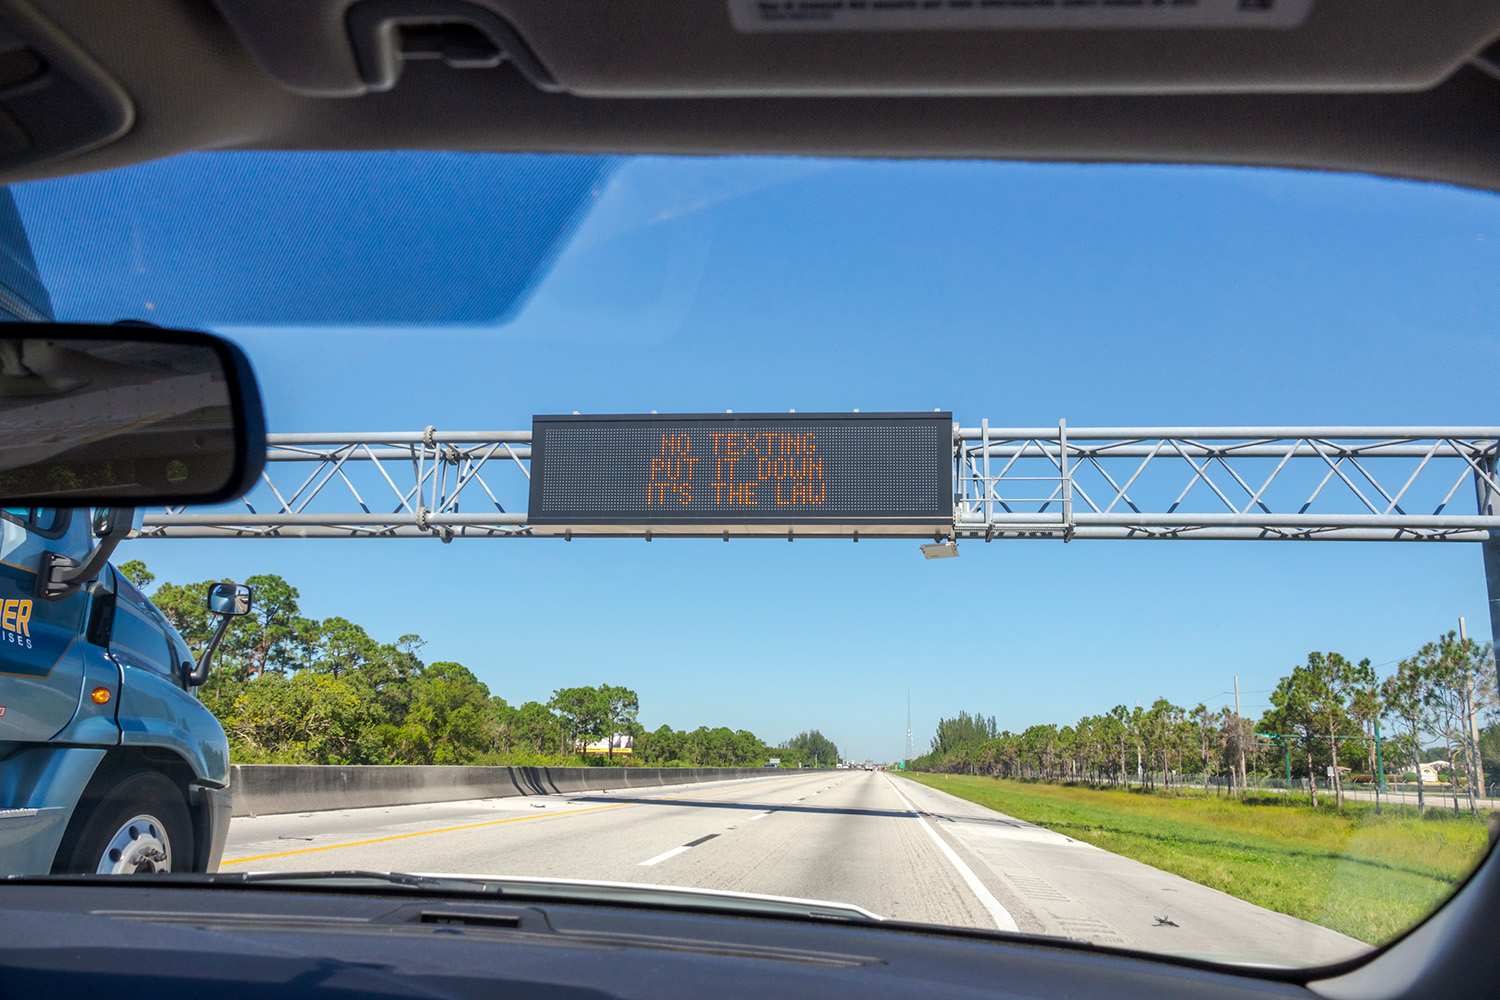 Ft Lauderdale Highway Sign Displaying Anti Texting Message which may be more effective than displaying fatalities